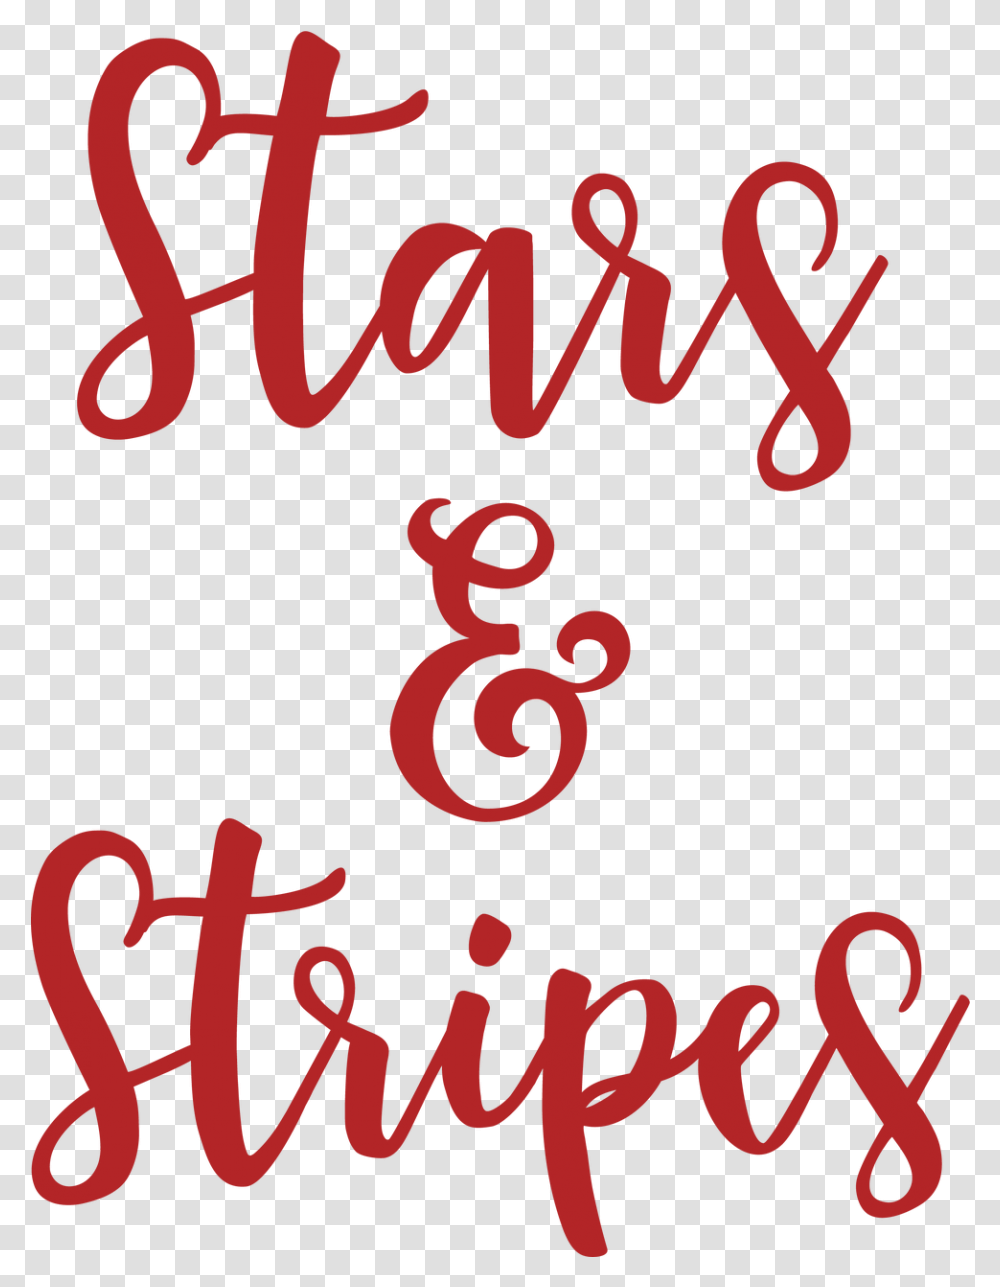 Stars & Stripes Svg Cut File Stars And Stripes Svg, Text, Alphabet, Calligraphy, Handwriting Transparent Png